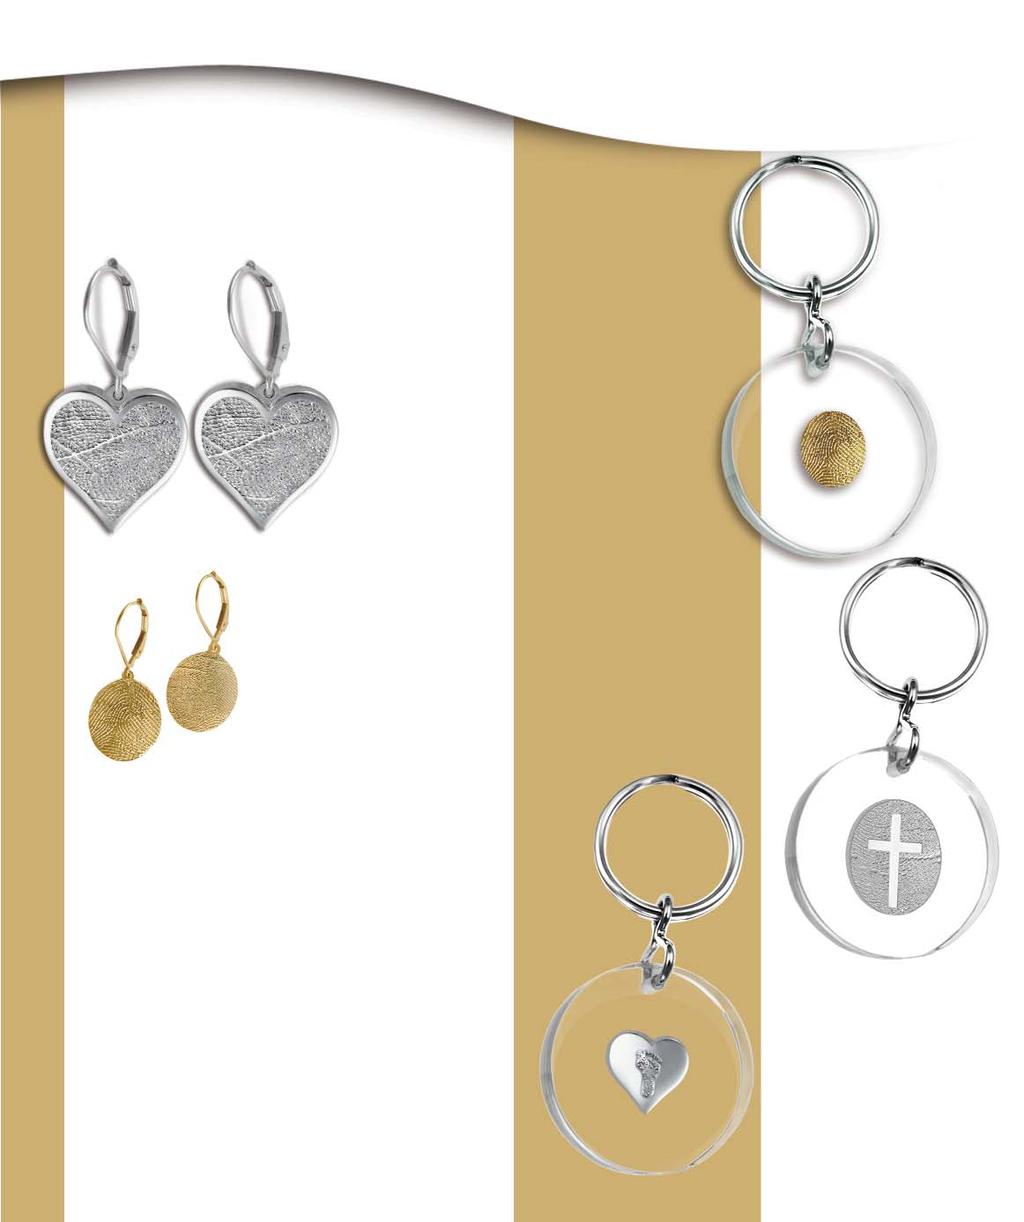 More For Her... Earrings Thumbies Standard or Heartfelt Charms hang freely from lever-back earrings. You can also add stones.